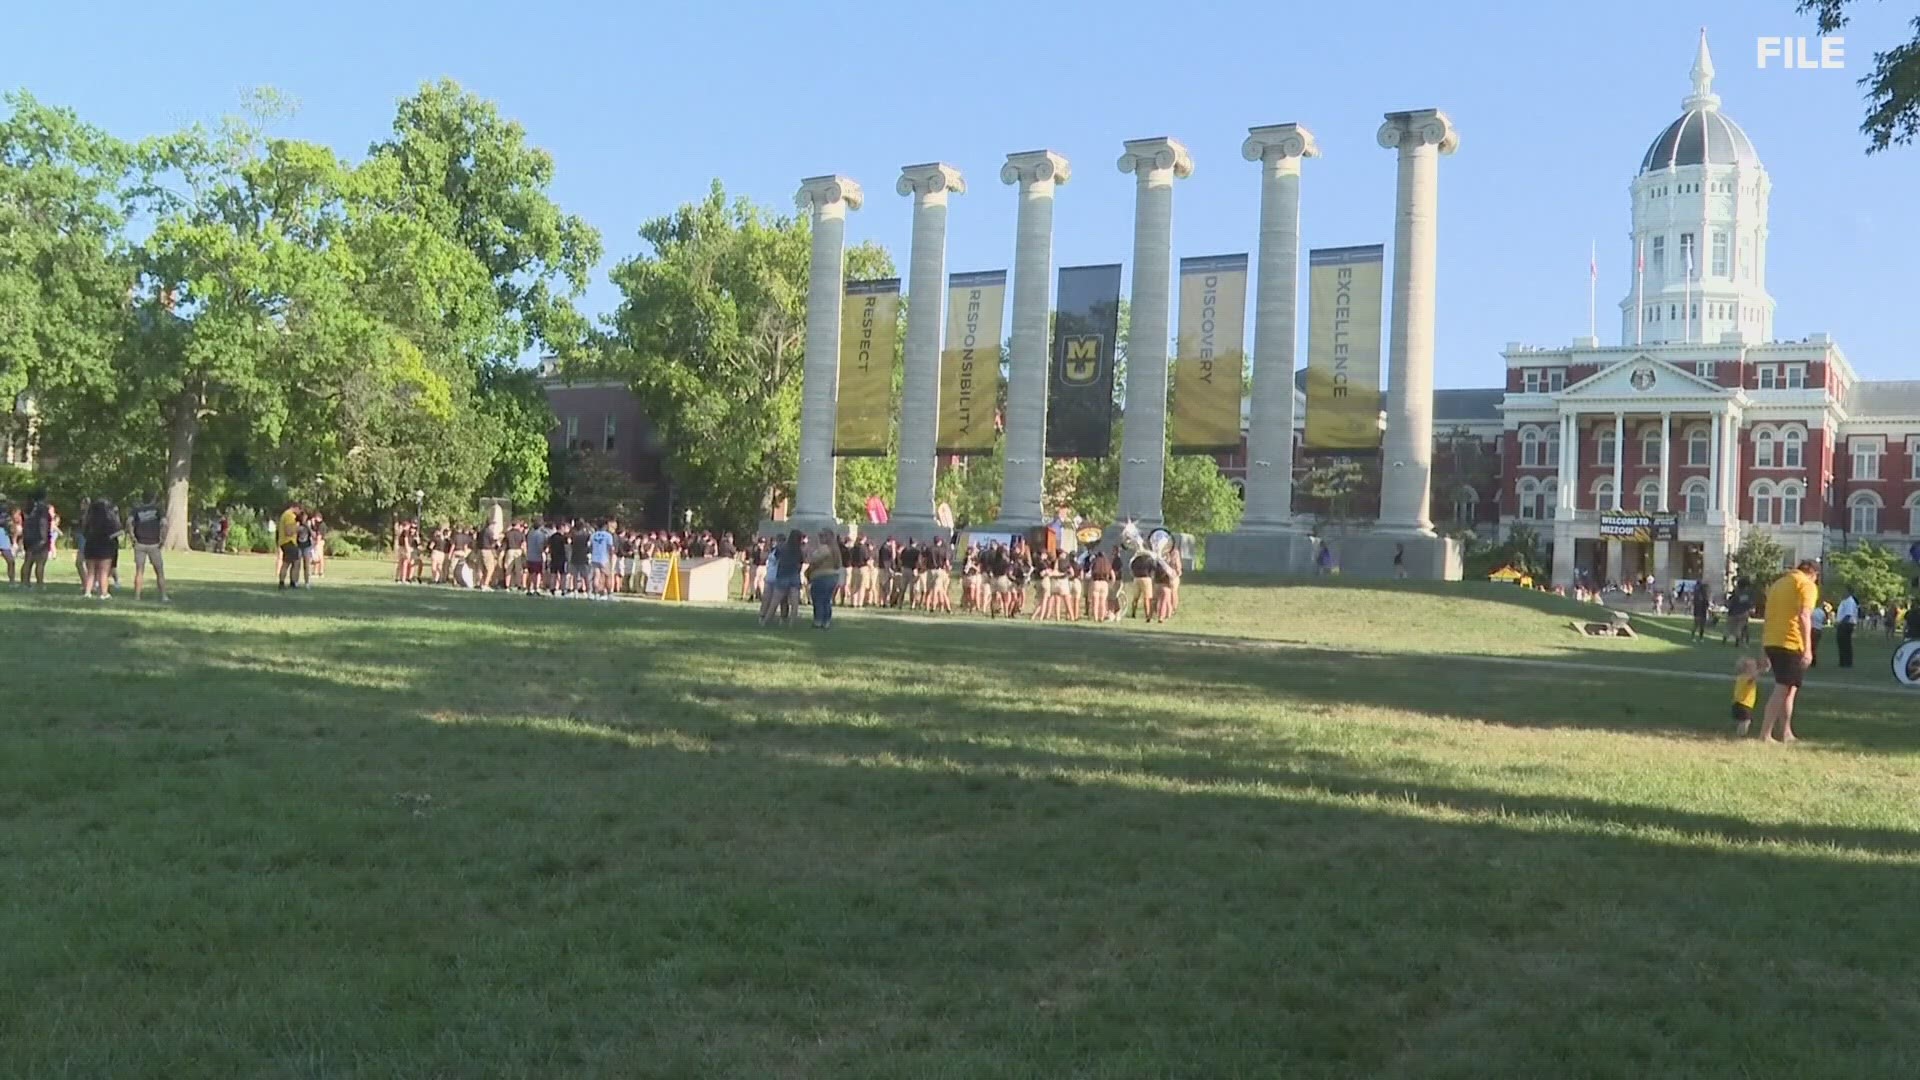 The deadline, which typically falls on May 1 for the University of Missouri system, was extended to May 15. SIUE also announced they would extend their deadline.